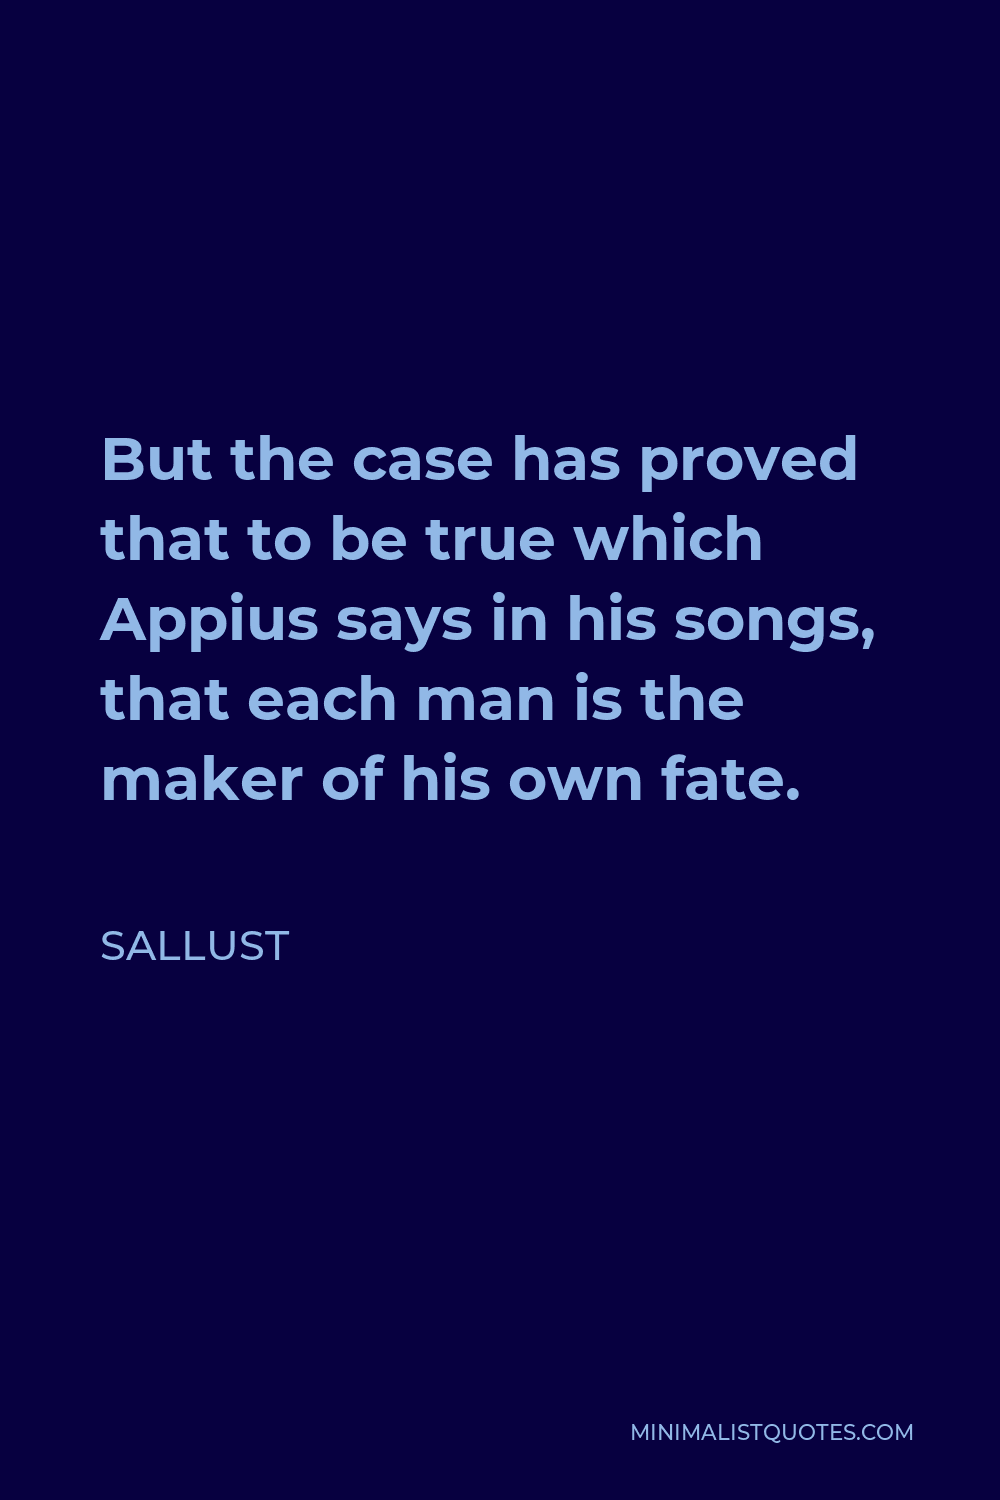 Sallust Quote - But the case has proved that to be true which Appius says in his songs, that each man is the maker of his own fate.